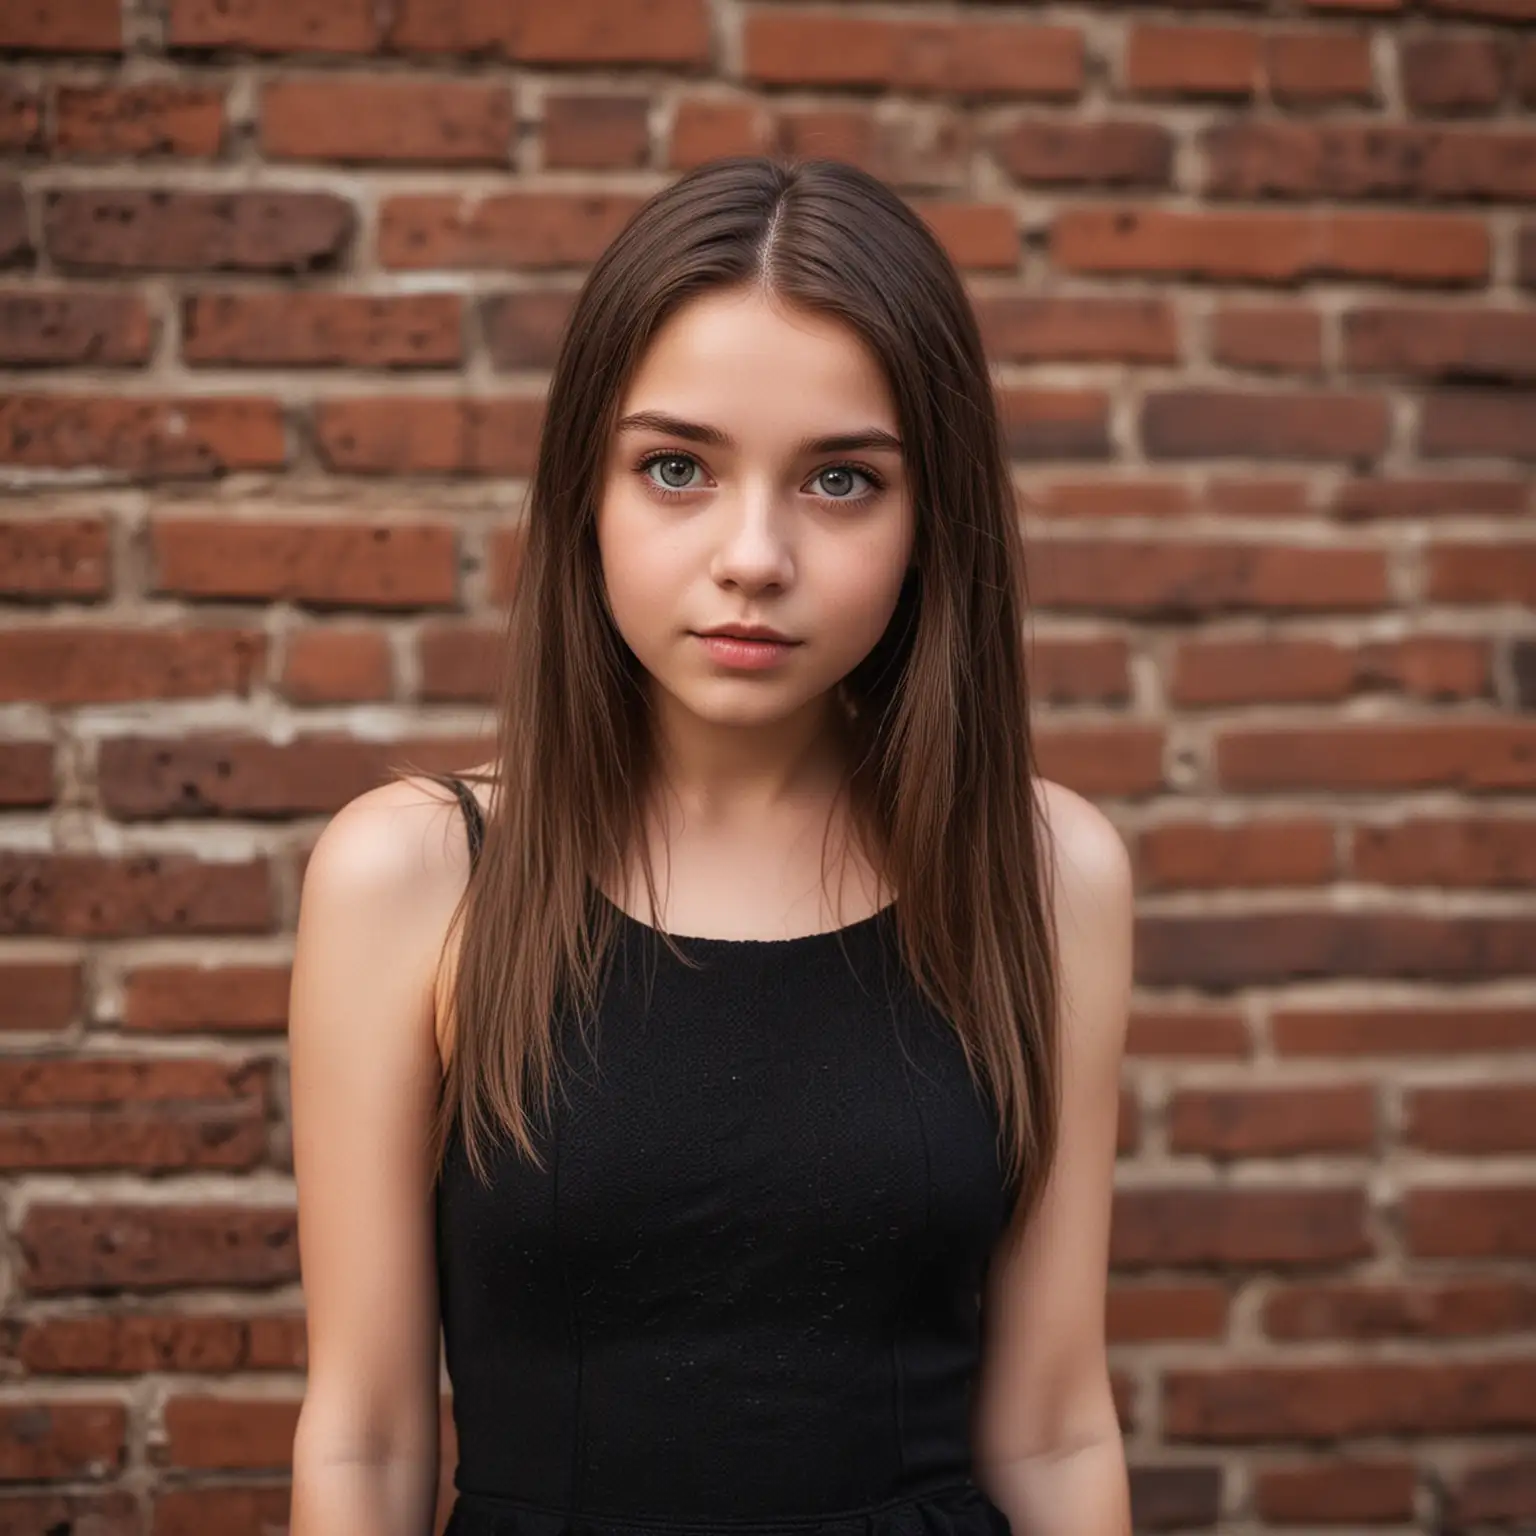 Young Girl Posing in Tight Black Dress against Brick Wall